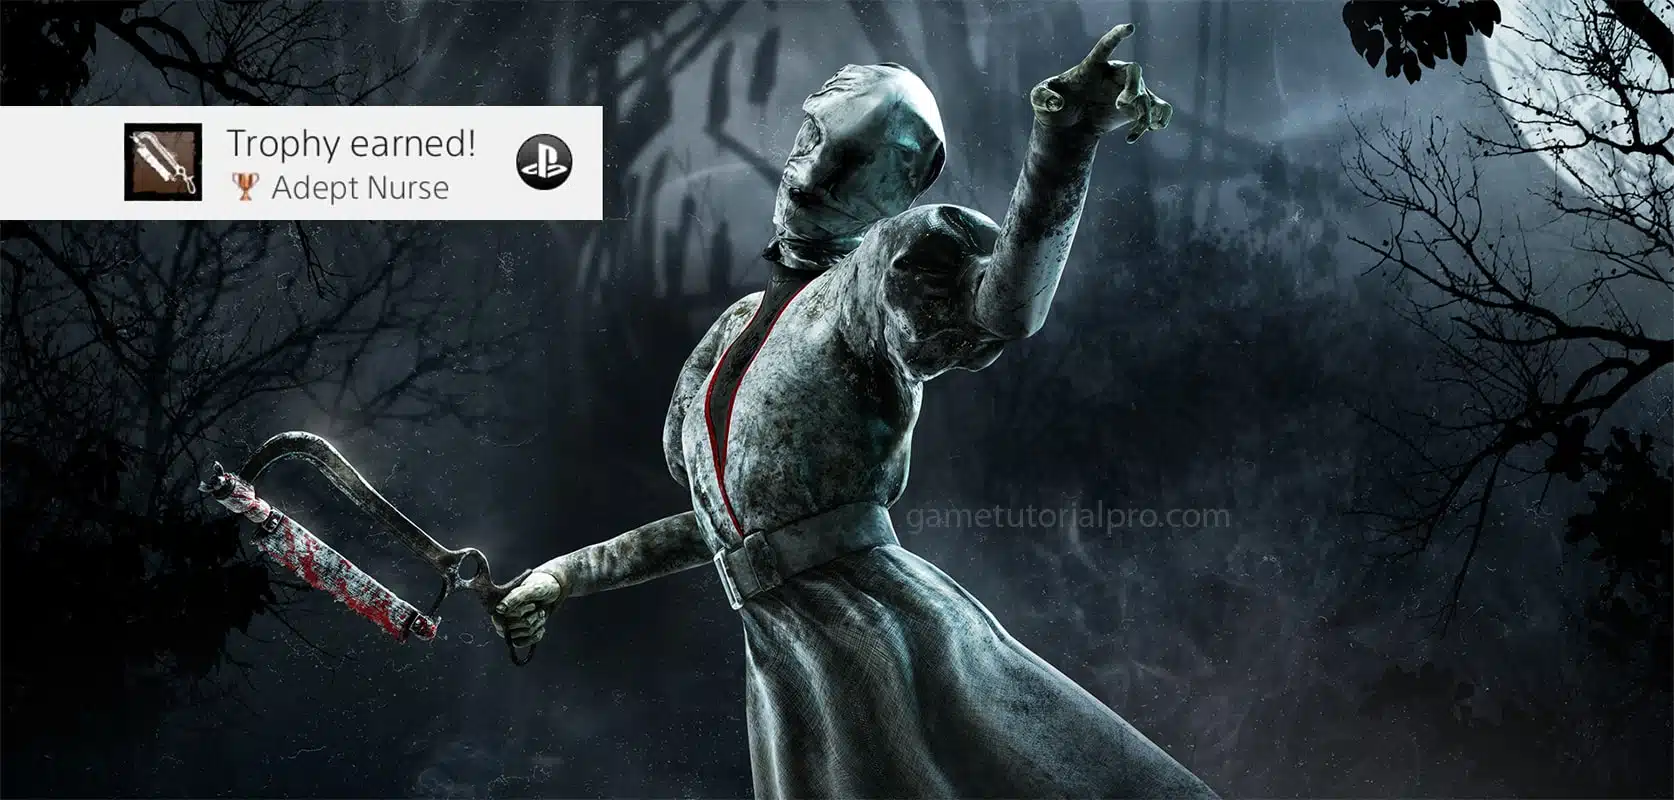 Dead By Daylight - How to Get Adept Nurse Trophy (For Platinum)